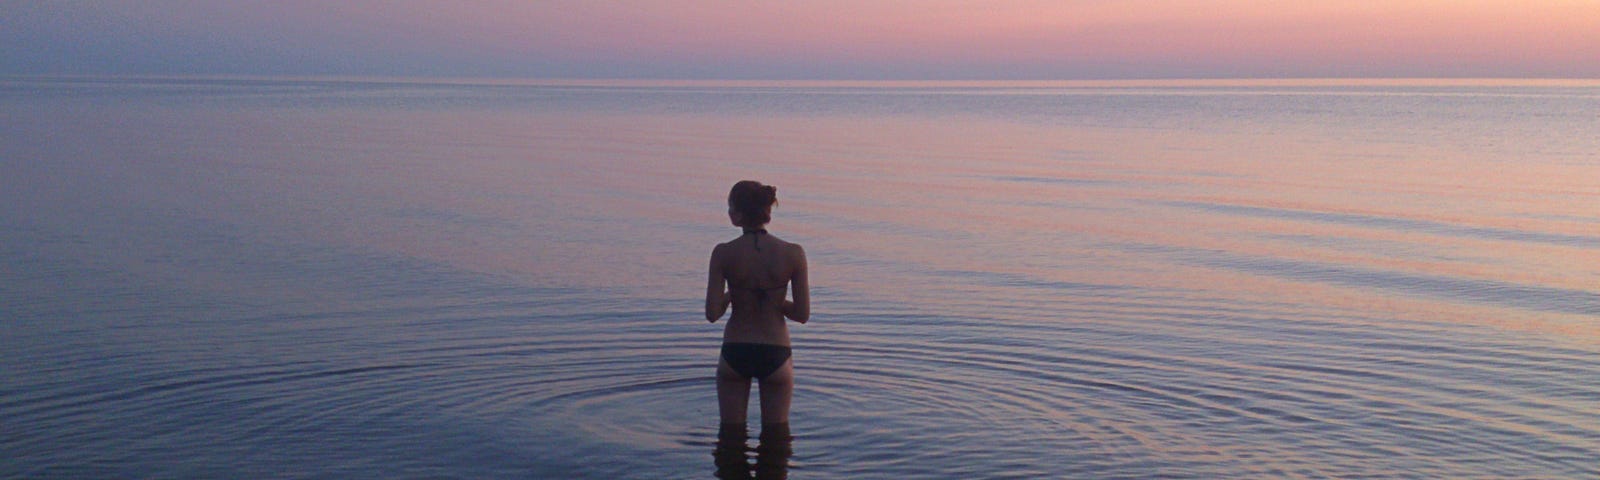 Woman paddling in water at sunset